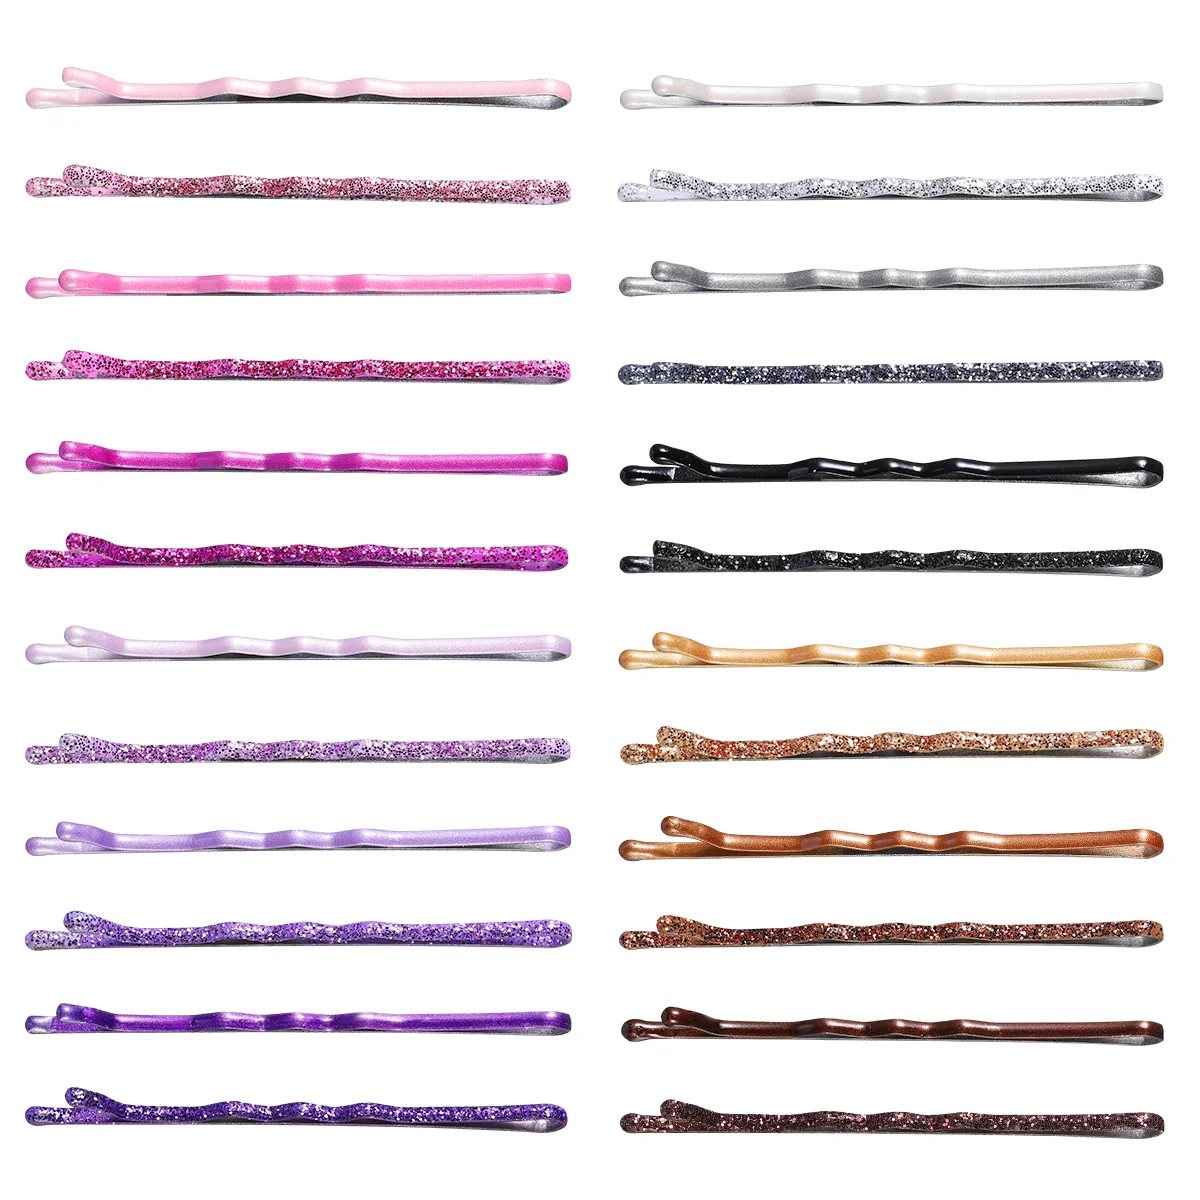 

96pcs Bobby Hair Varnish Metal Bobby Barrettes Hairpins Hair Styling Clips for Girl Ladies